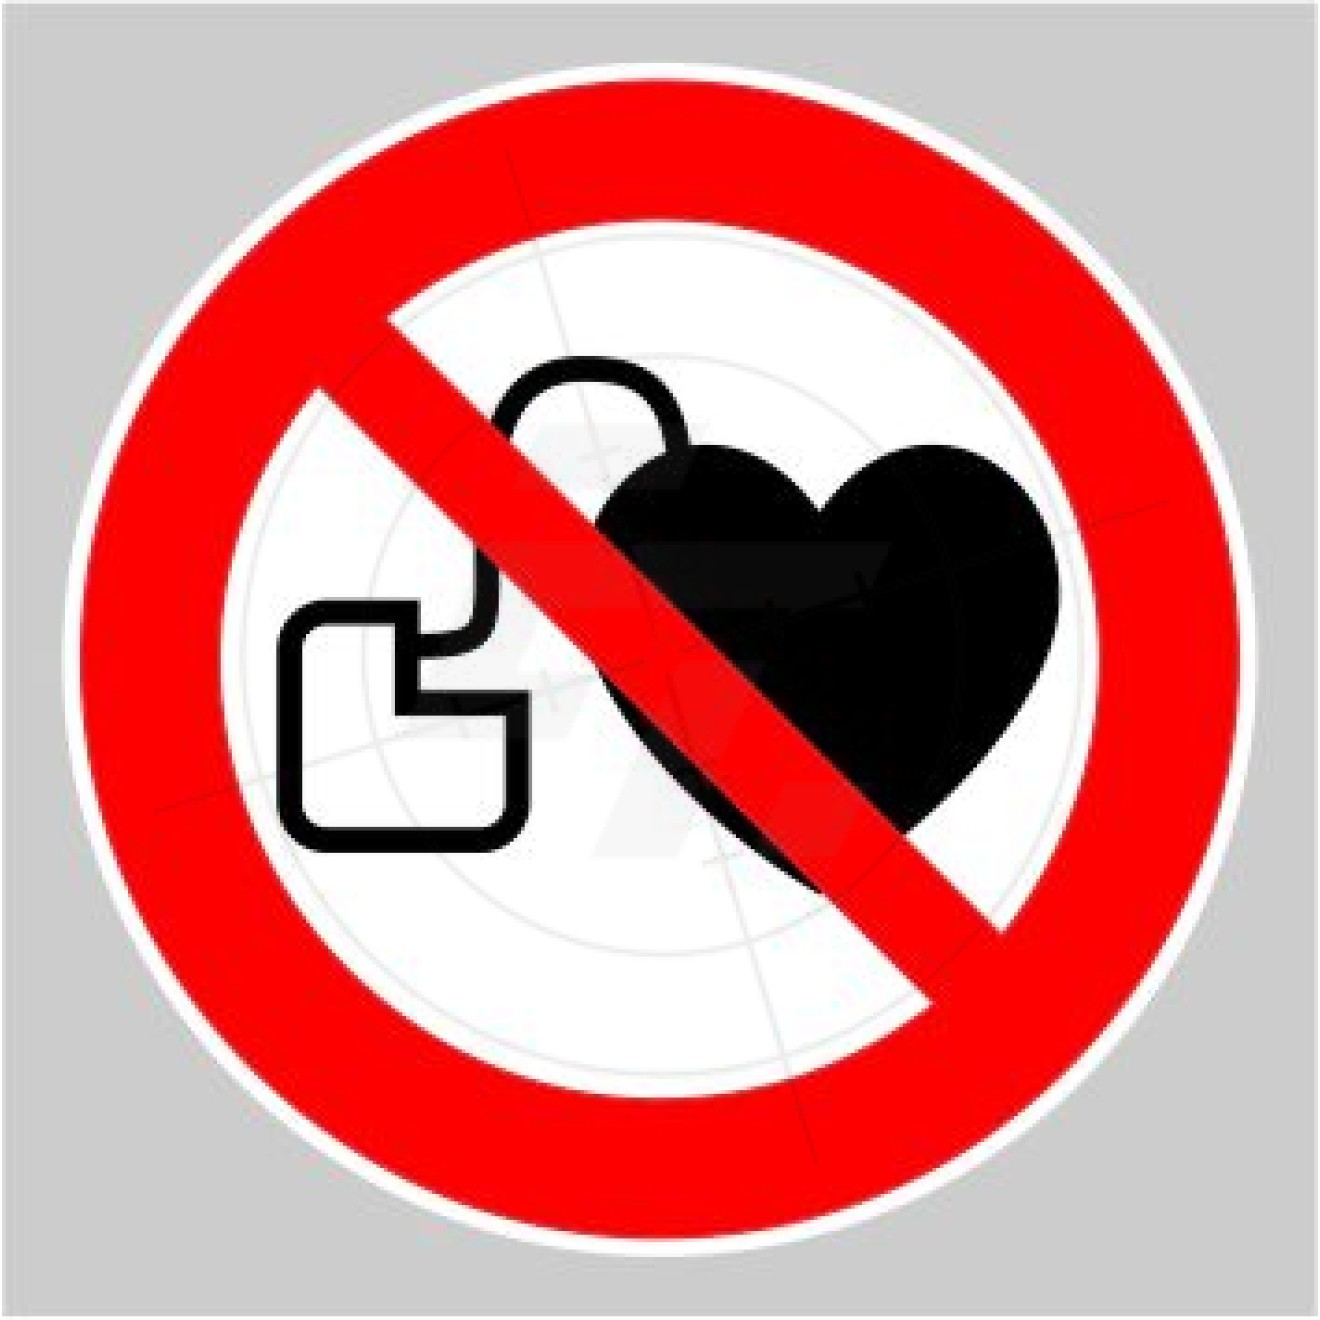 No access for people with pacemakers